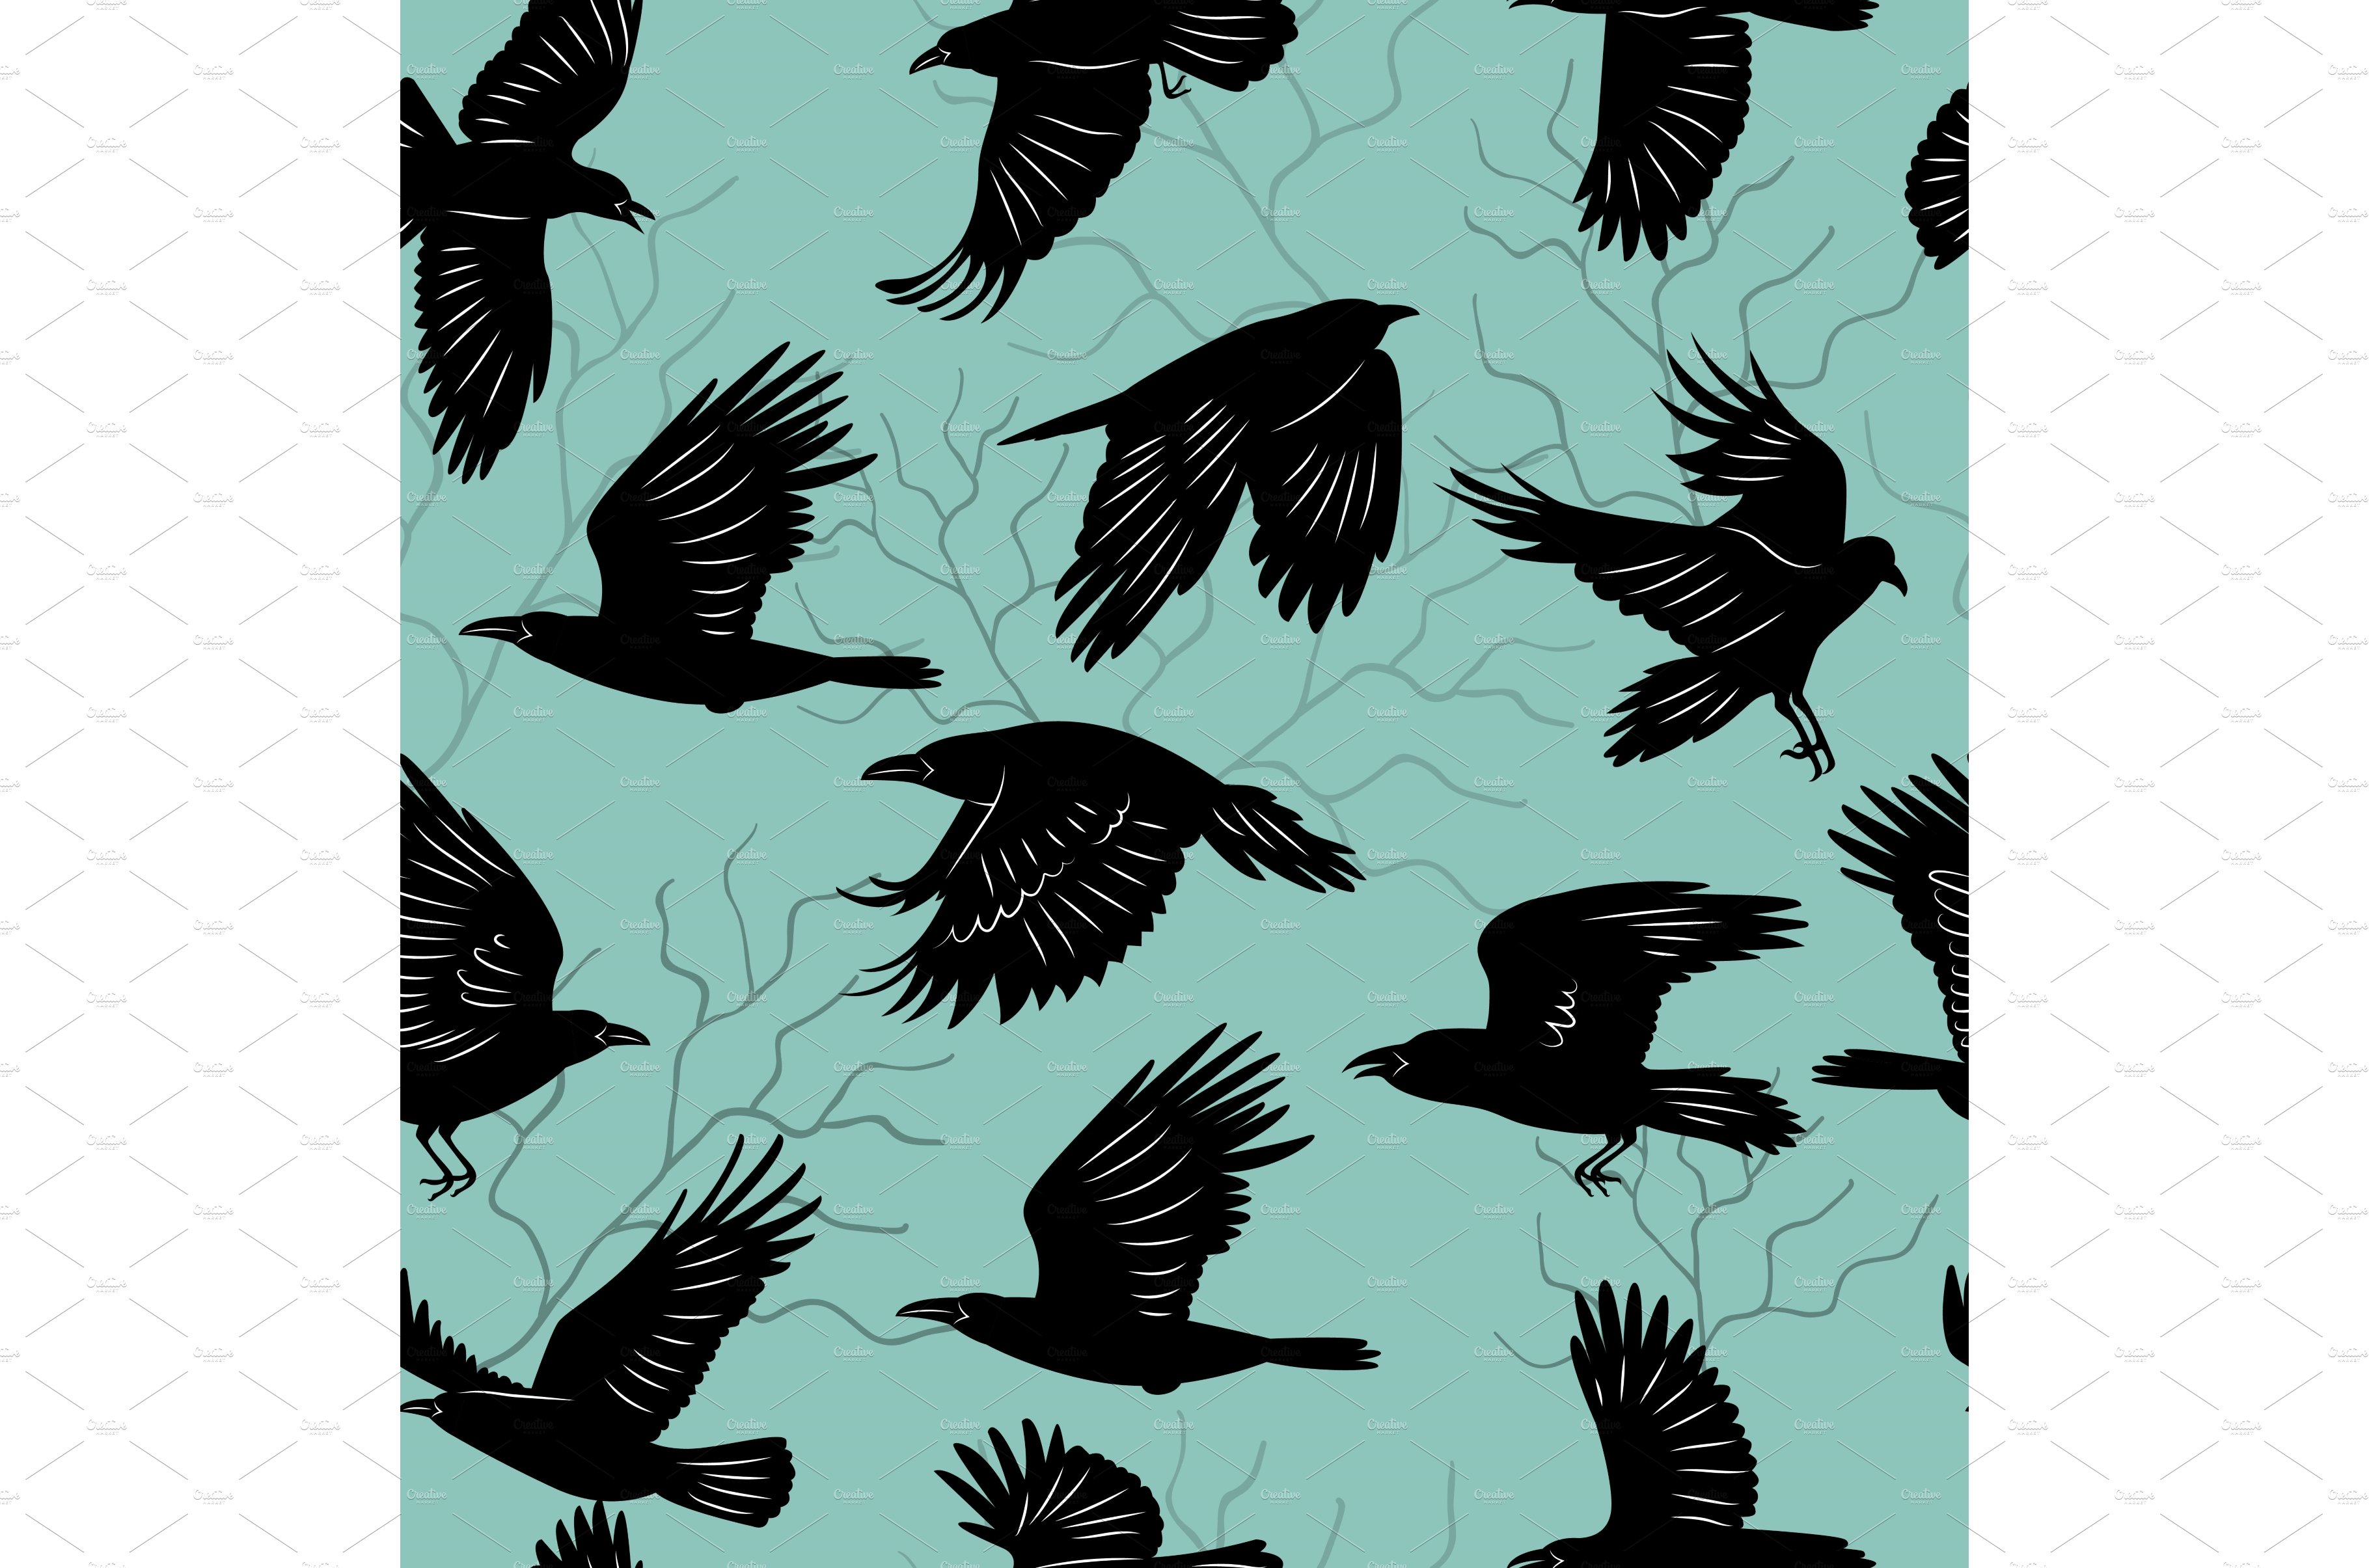 Crow birds. Flying ghotic birds cover image.